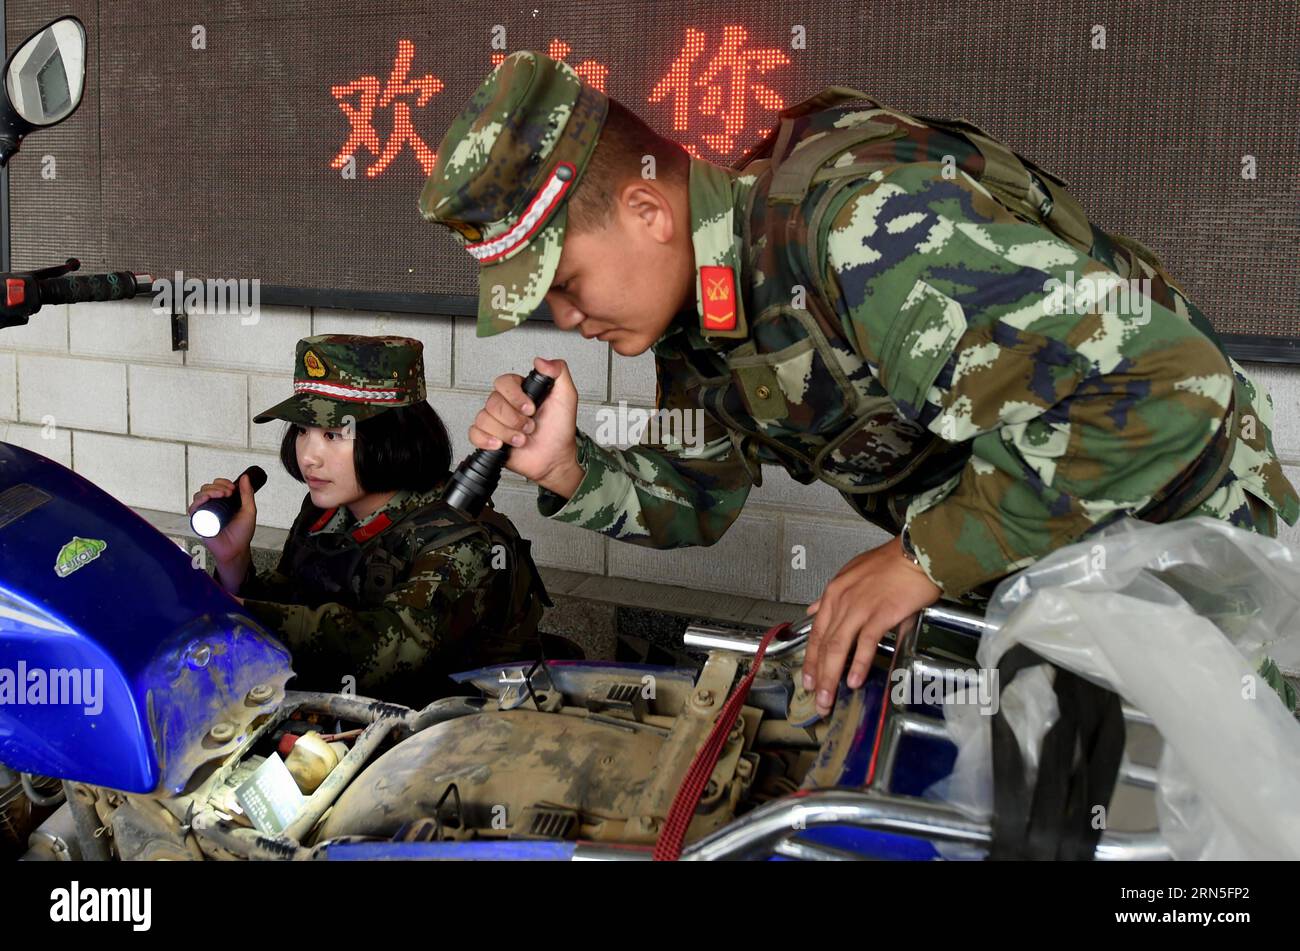 DEHONG, June 24, 2015 -- Zhang Liu (L) and her comrade check a refitted motorcycle for contraband at the border checkpoint of Mukang in Dehong Dai-Jingpo Autonomous Prefecture, southwest China s Yunnan Province, June 24, 2015. Born in 1995, Zhang Liu became an anti-drug soldier in border checkpoint of Mukang in 2013. Grown up in an affluent family in central China s Hunan Province, Zhang said that being a soldier had always been her dream, which drove her to join the army after graduating from high school. Being a front line anti-drug force, the border checkpoint of Mukang has captured about 1 Stock Photo